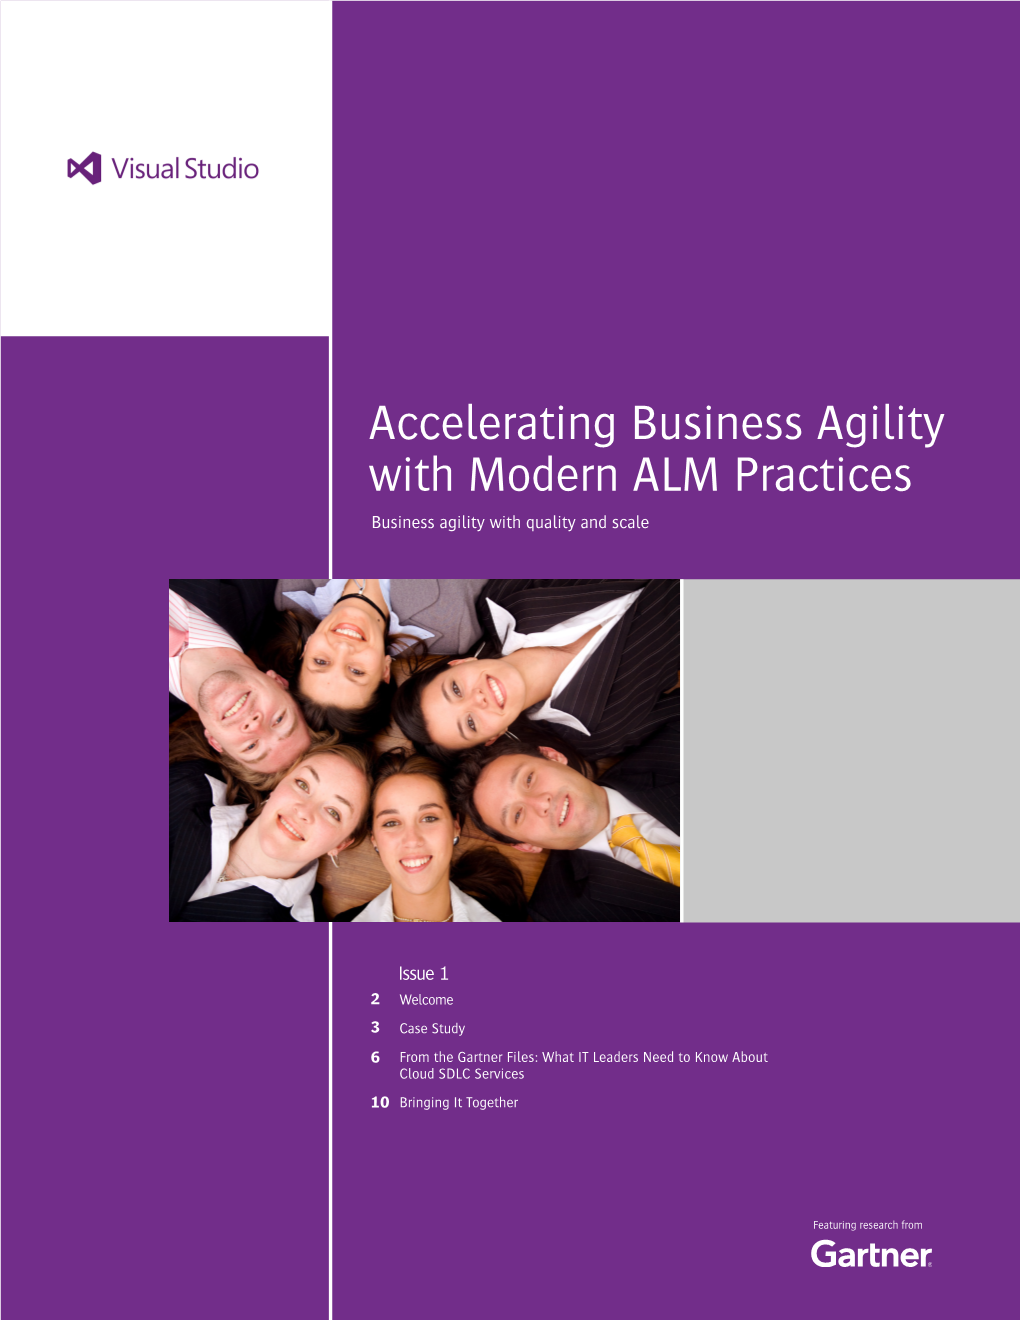 Accelerating Business Agility with Modern ALM Practices Business Agility with Quality and Scale